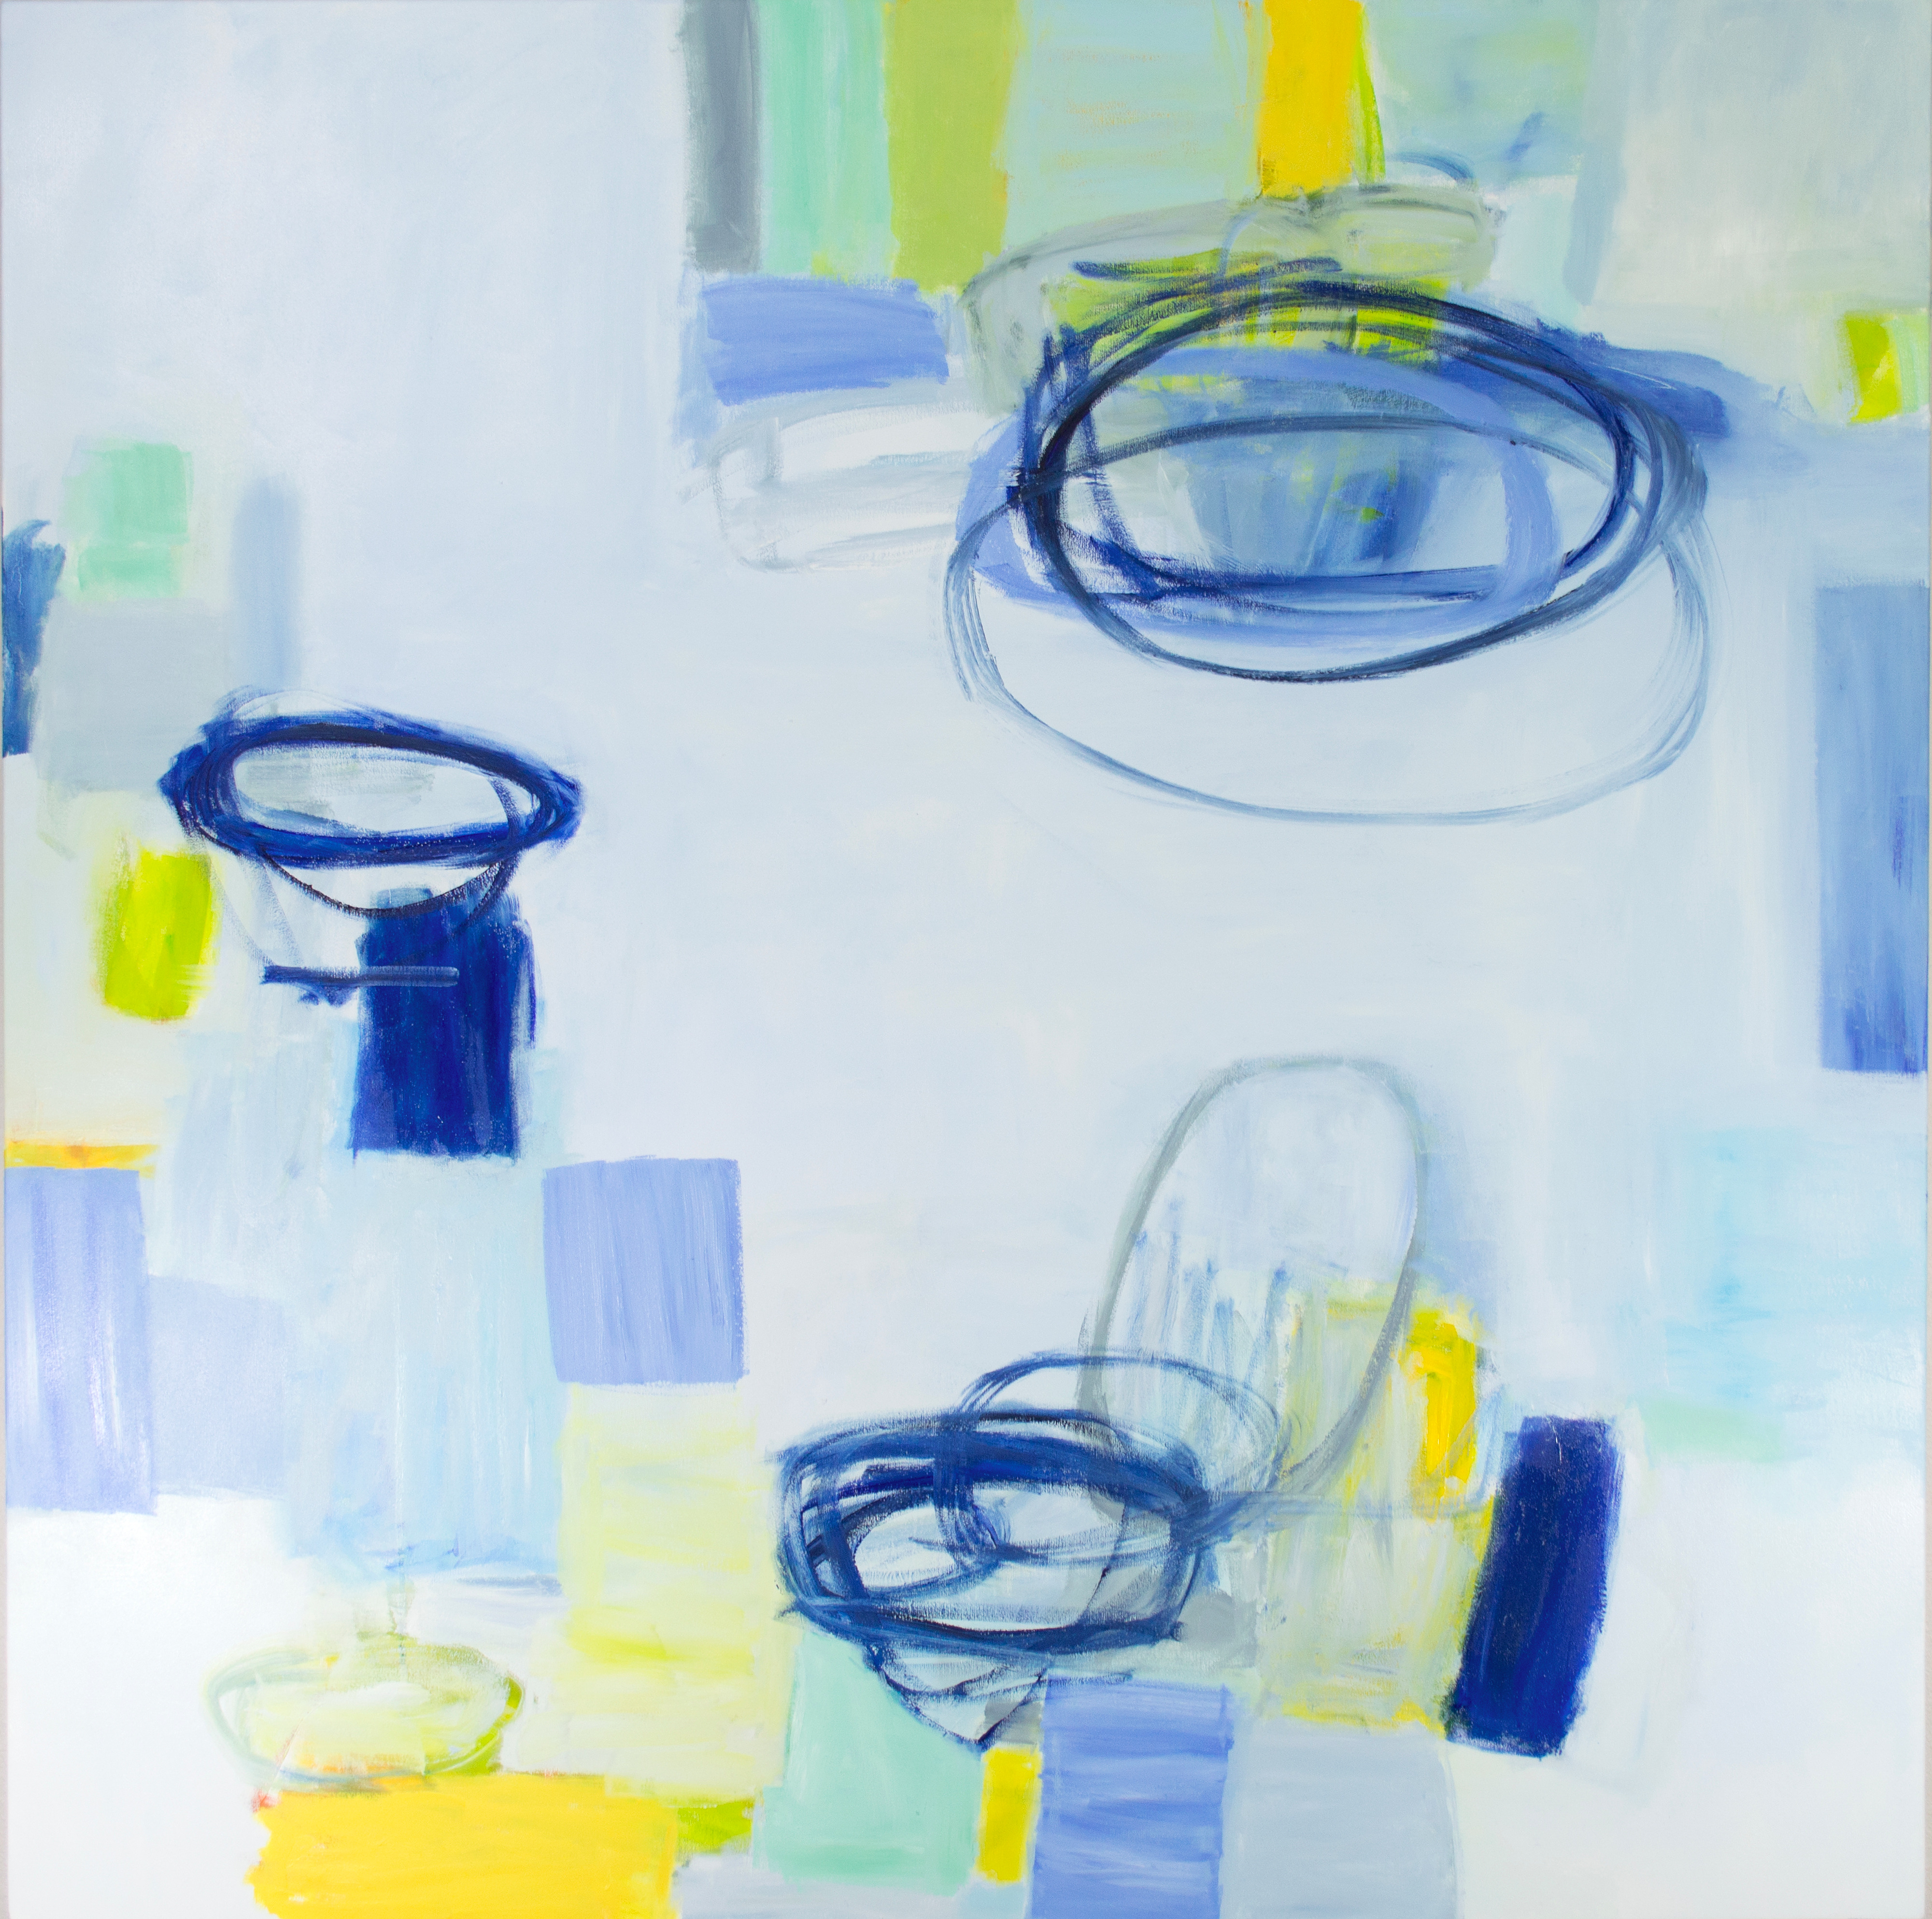 Absolute Uncertainty by Julia Rymer | ArtworkNetwork.com